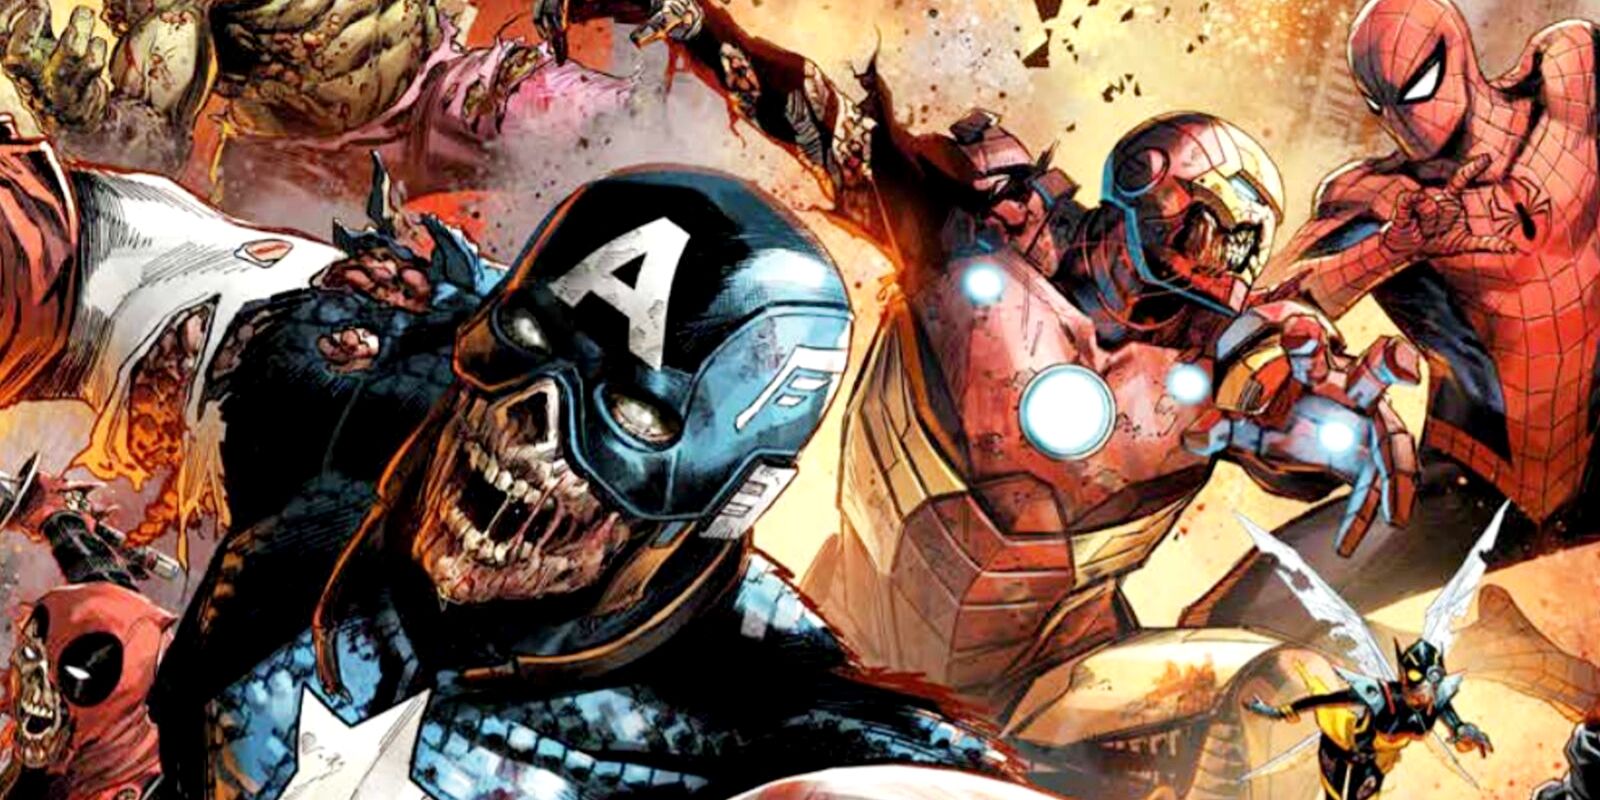 Undead Captain America, Deadpool, Wasp and Iron Man and a living Spider-Man from Marvel's Zombies board game artwork.